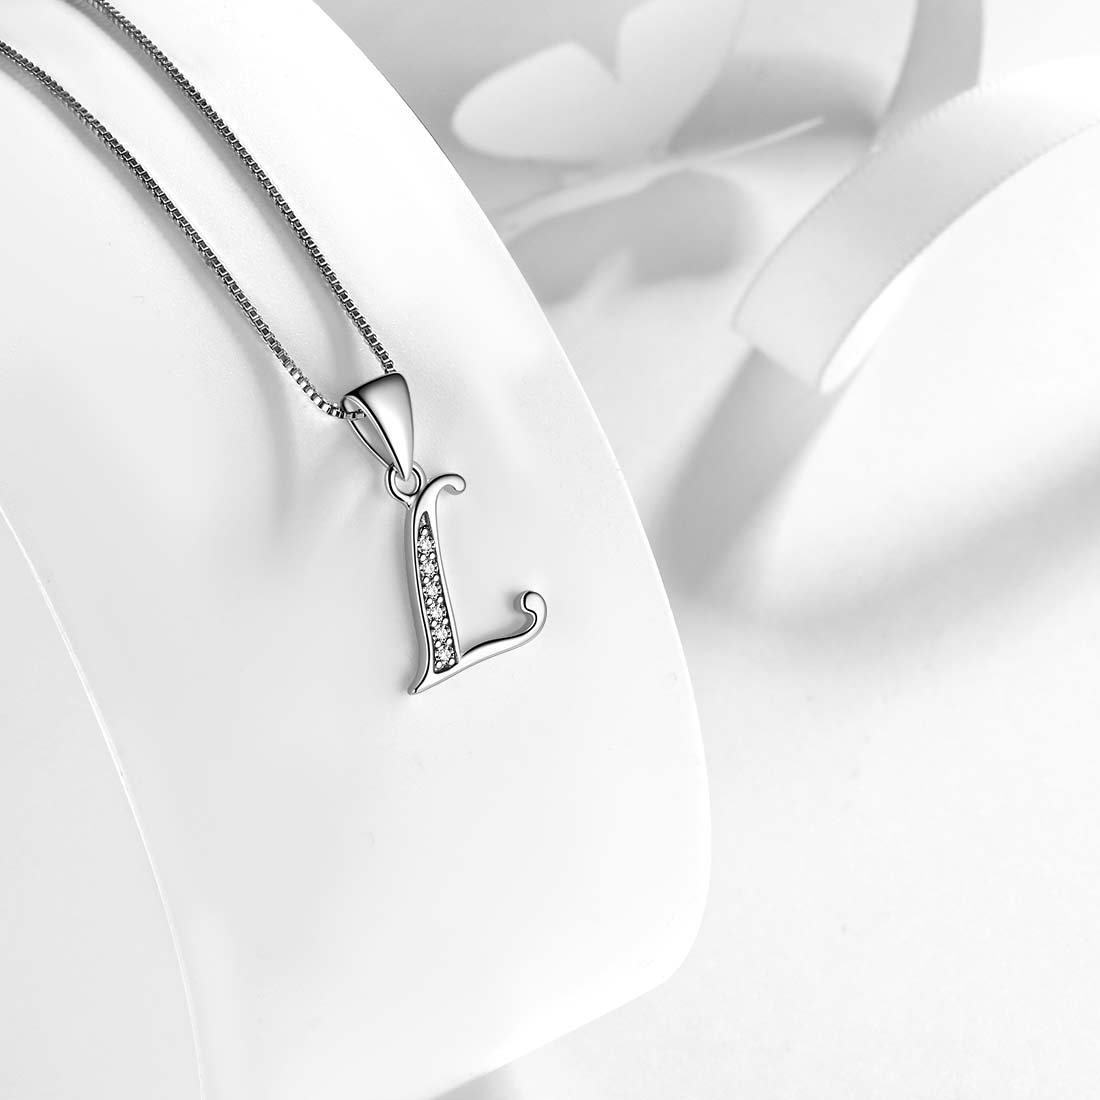 Letter L Initial Necklaces 925 Sterling Silver - Necklaces - Aurora Tears Jewelry